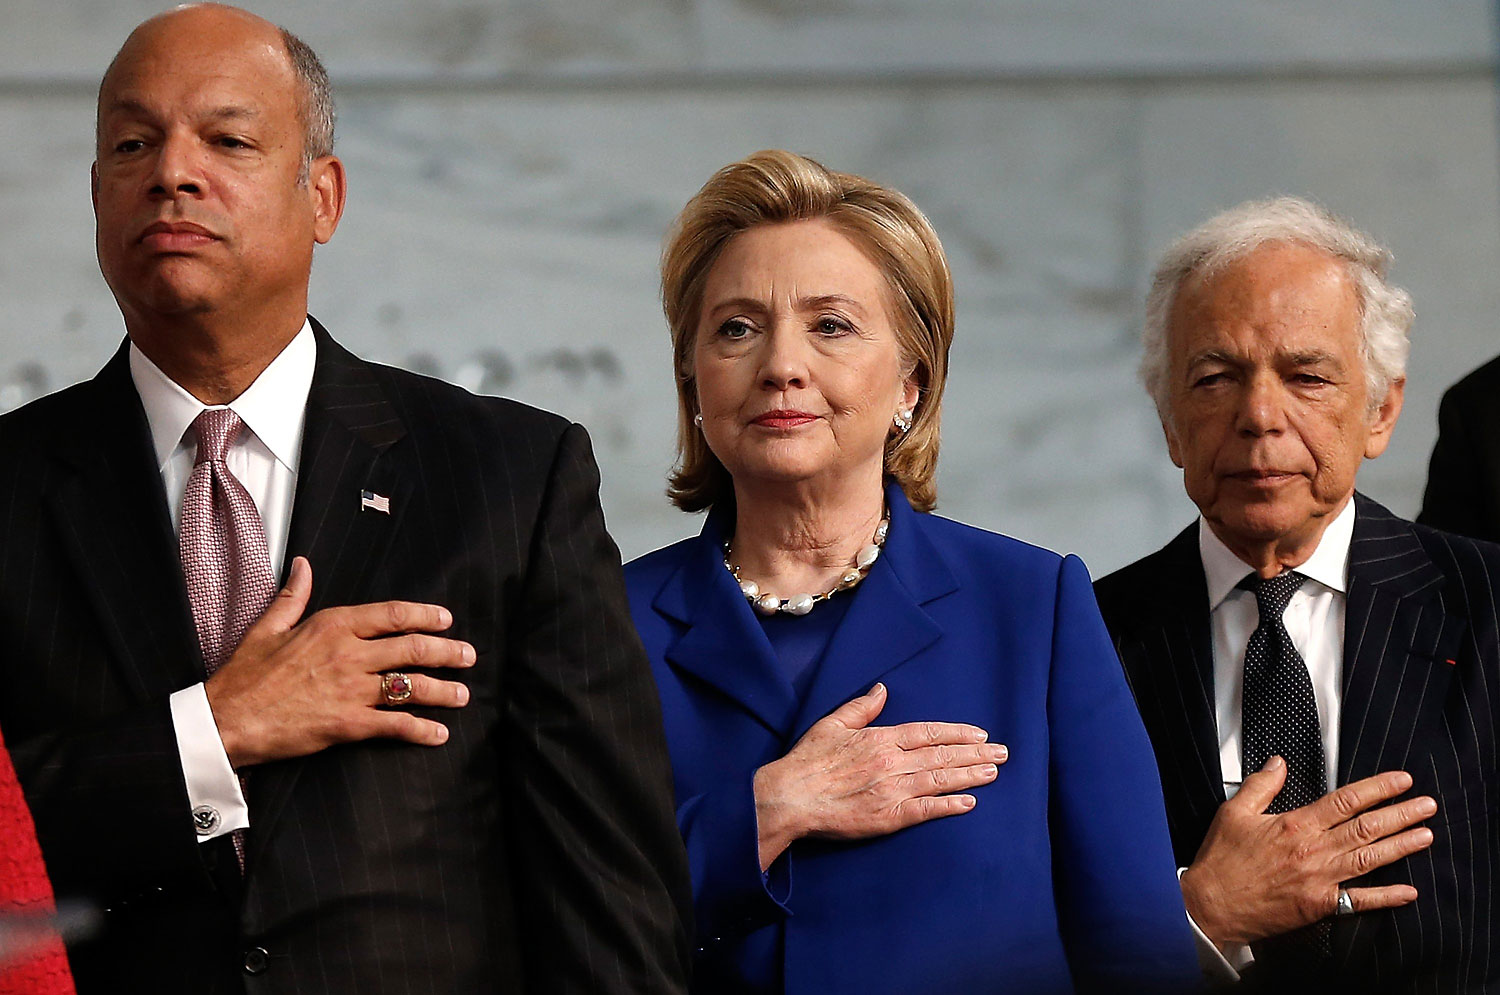 From left, U.S. Secretary of Homeland Security Jeh Johnson, Former U.S. Secretary of State Hillary Clinton and designer Ralph Lauren say the Pledge of Allegiance during a naturalization ceremony at the National Museum of American History June 17, 2014 in Washington, DC. (Win McNamee—Getty Images)